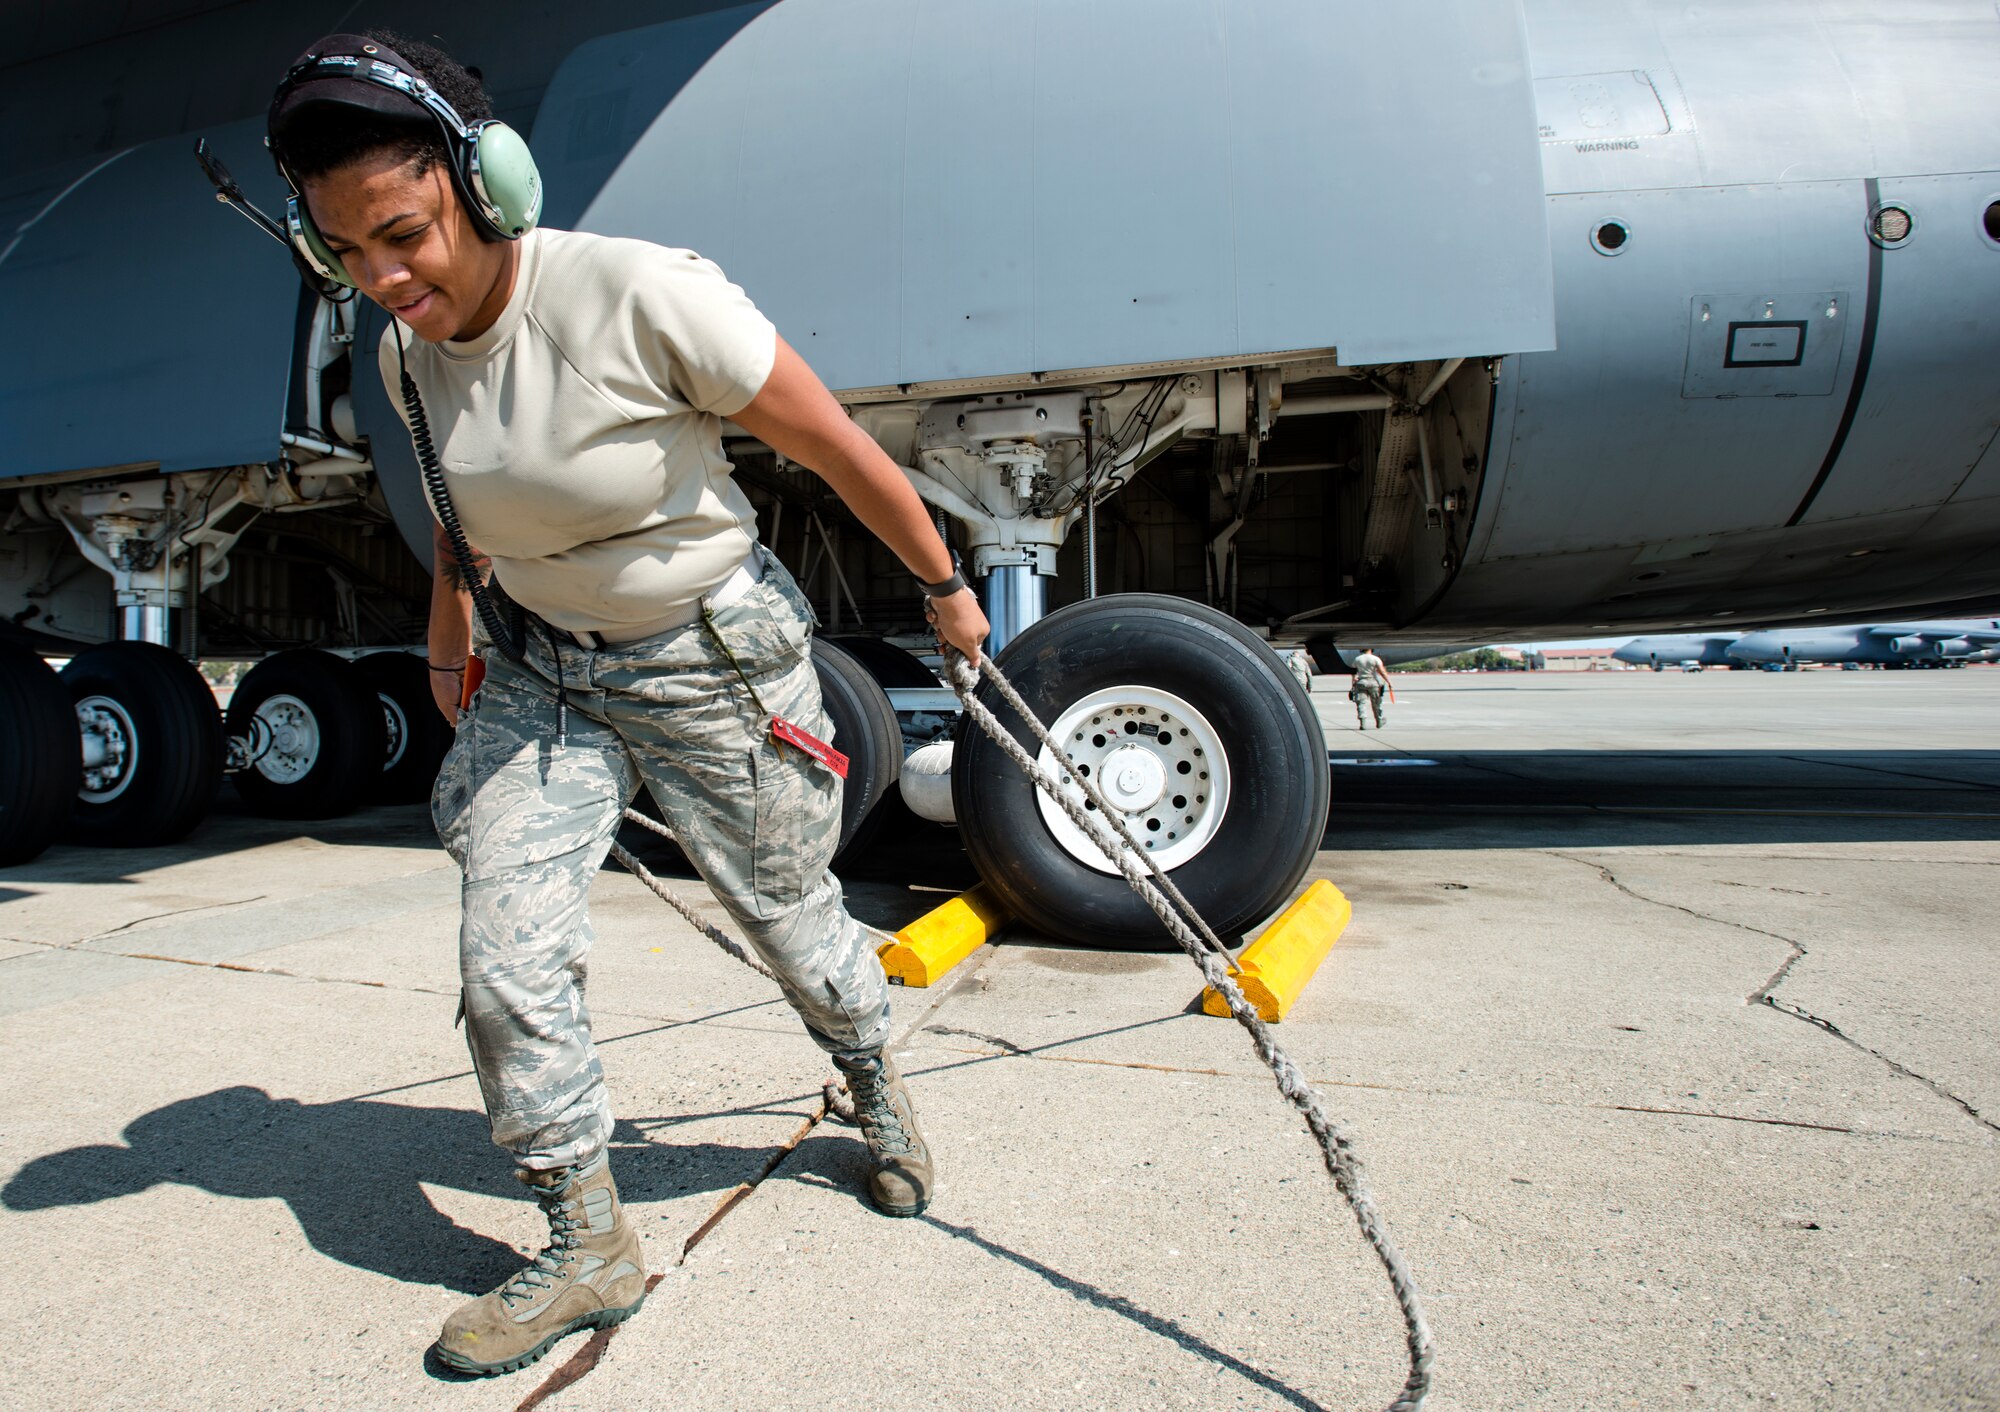 Airman 1st Class Amber St. Julian, 60th Aircraft Maintenance Squadron crew chief, removes chalks from the wheels of a C-5M Super Galaxy prior to launch on Aug. 11, 2018, at Travis Air Force Base, Calif. The 349th and 60th AMXS work together to launch aircraft in a seamless active duty and Air Force Reserve integration.